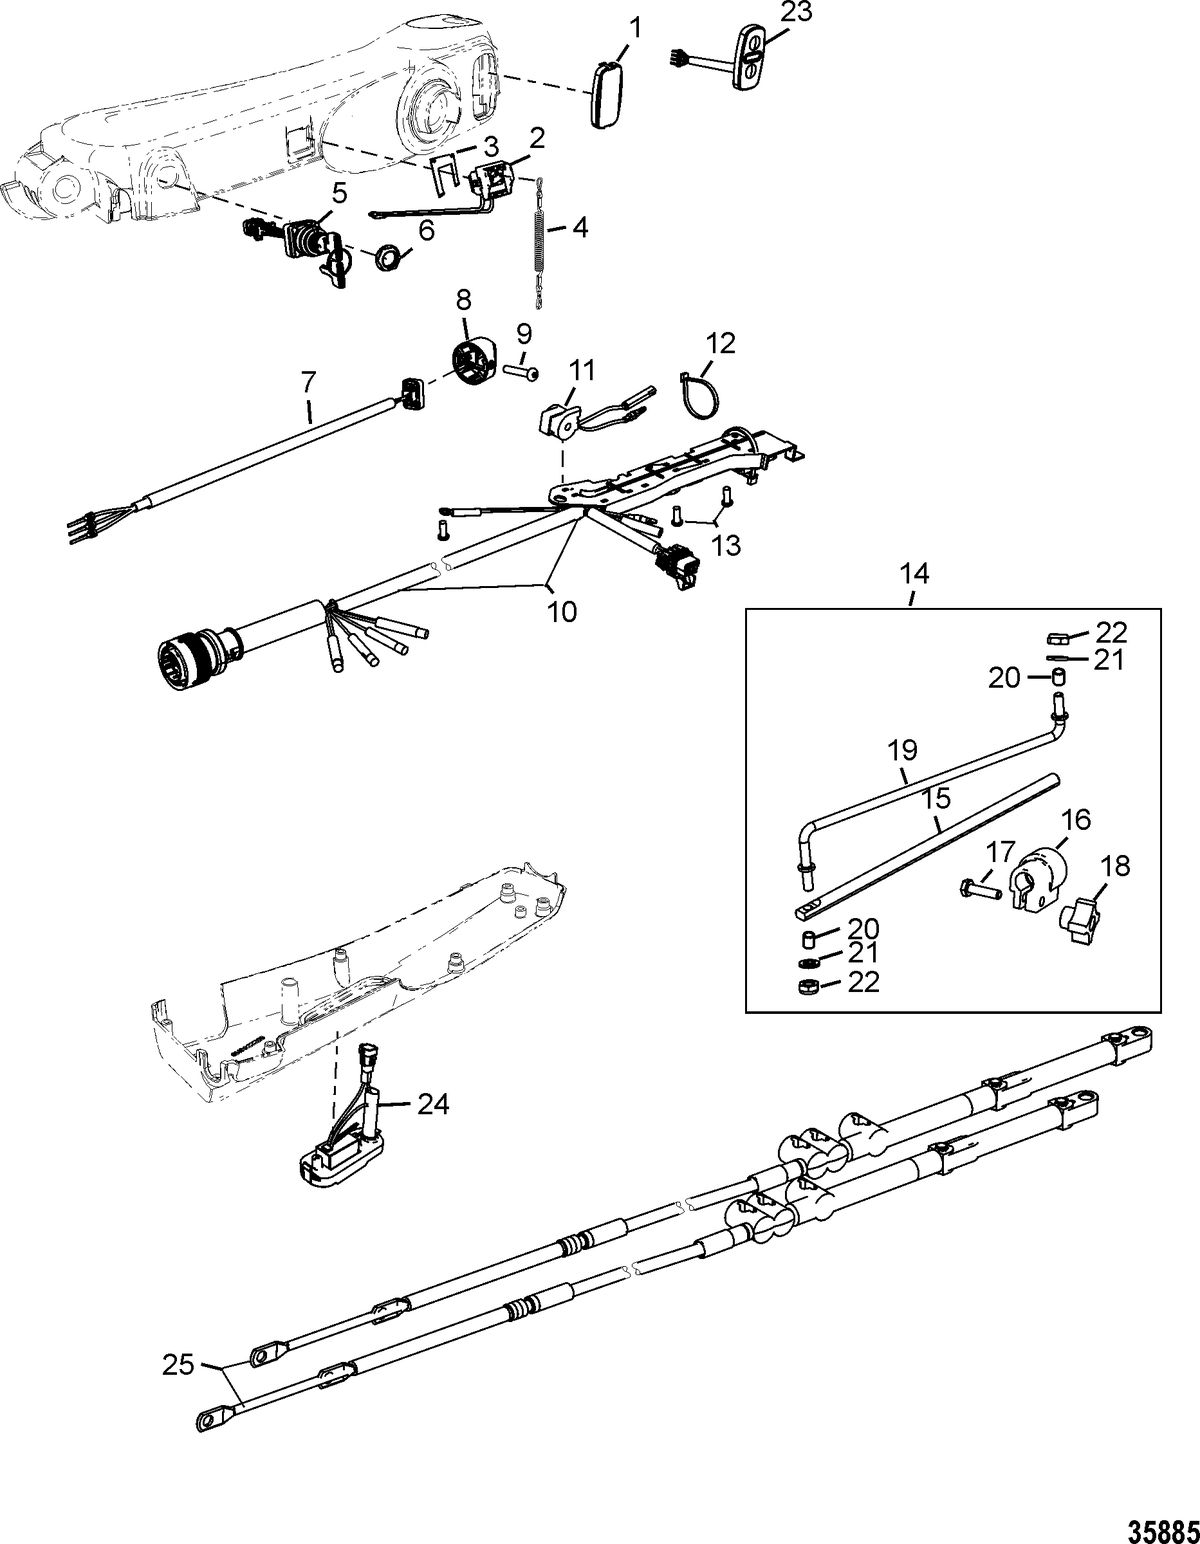 ACCESSORIES STEERING SYSTEMS AND COMPONENTS Tiller Handle Kit Components(Big Tiller-Manual Mechanical)